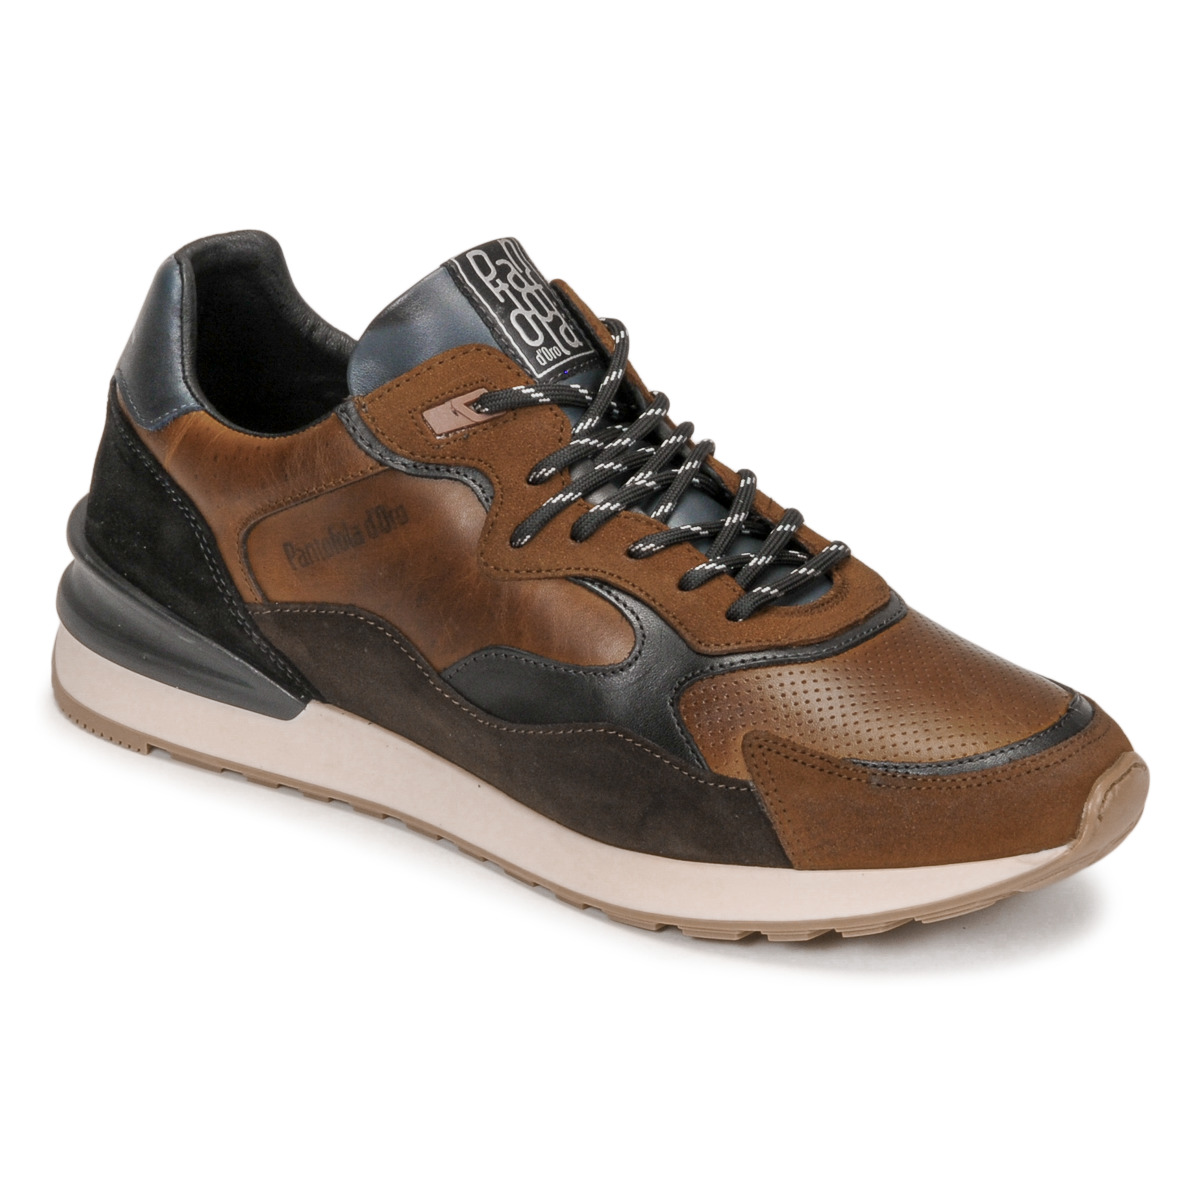 Guess Synthetic Treviso Trainers in Metallic for Men Mens Shoes Trainers Low-top trainers 